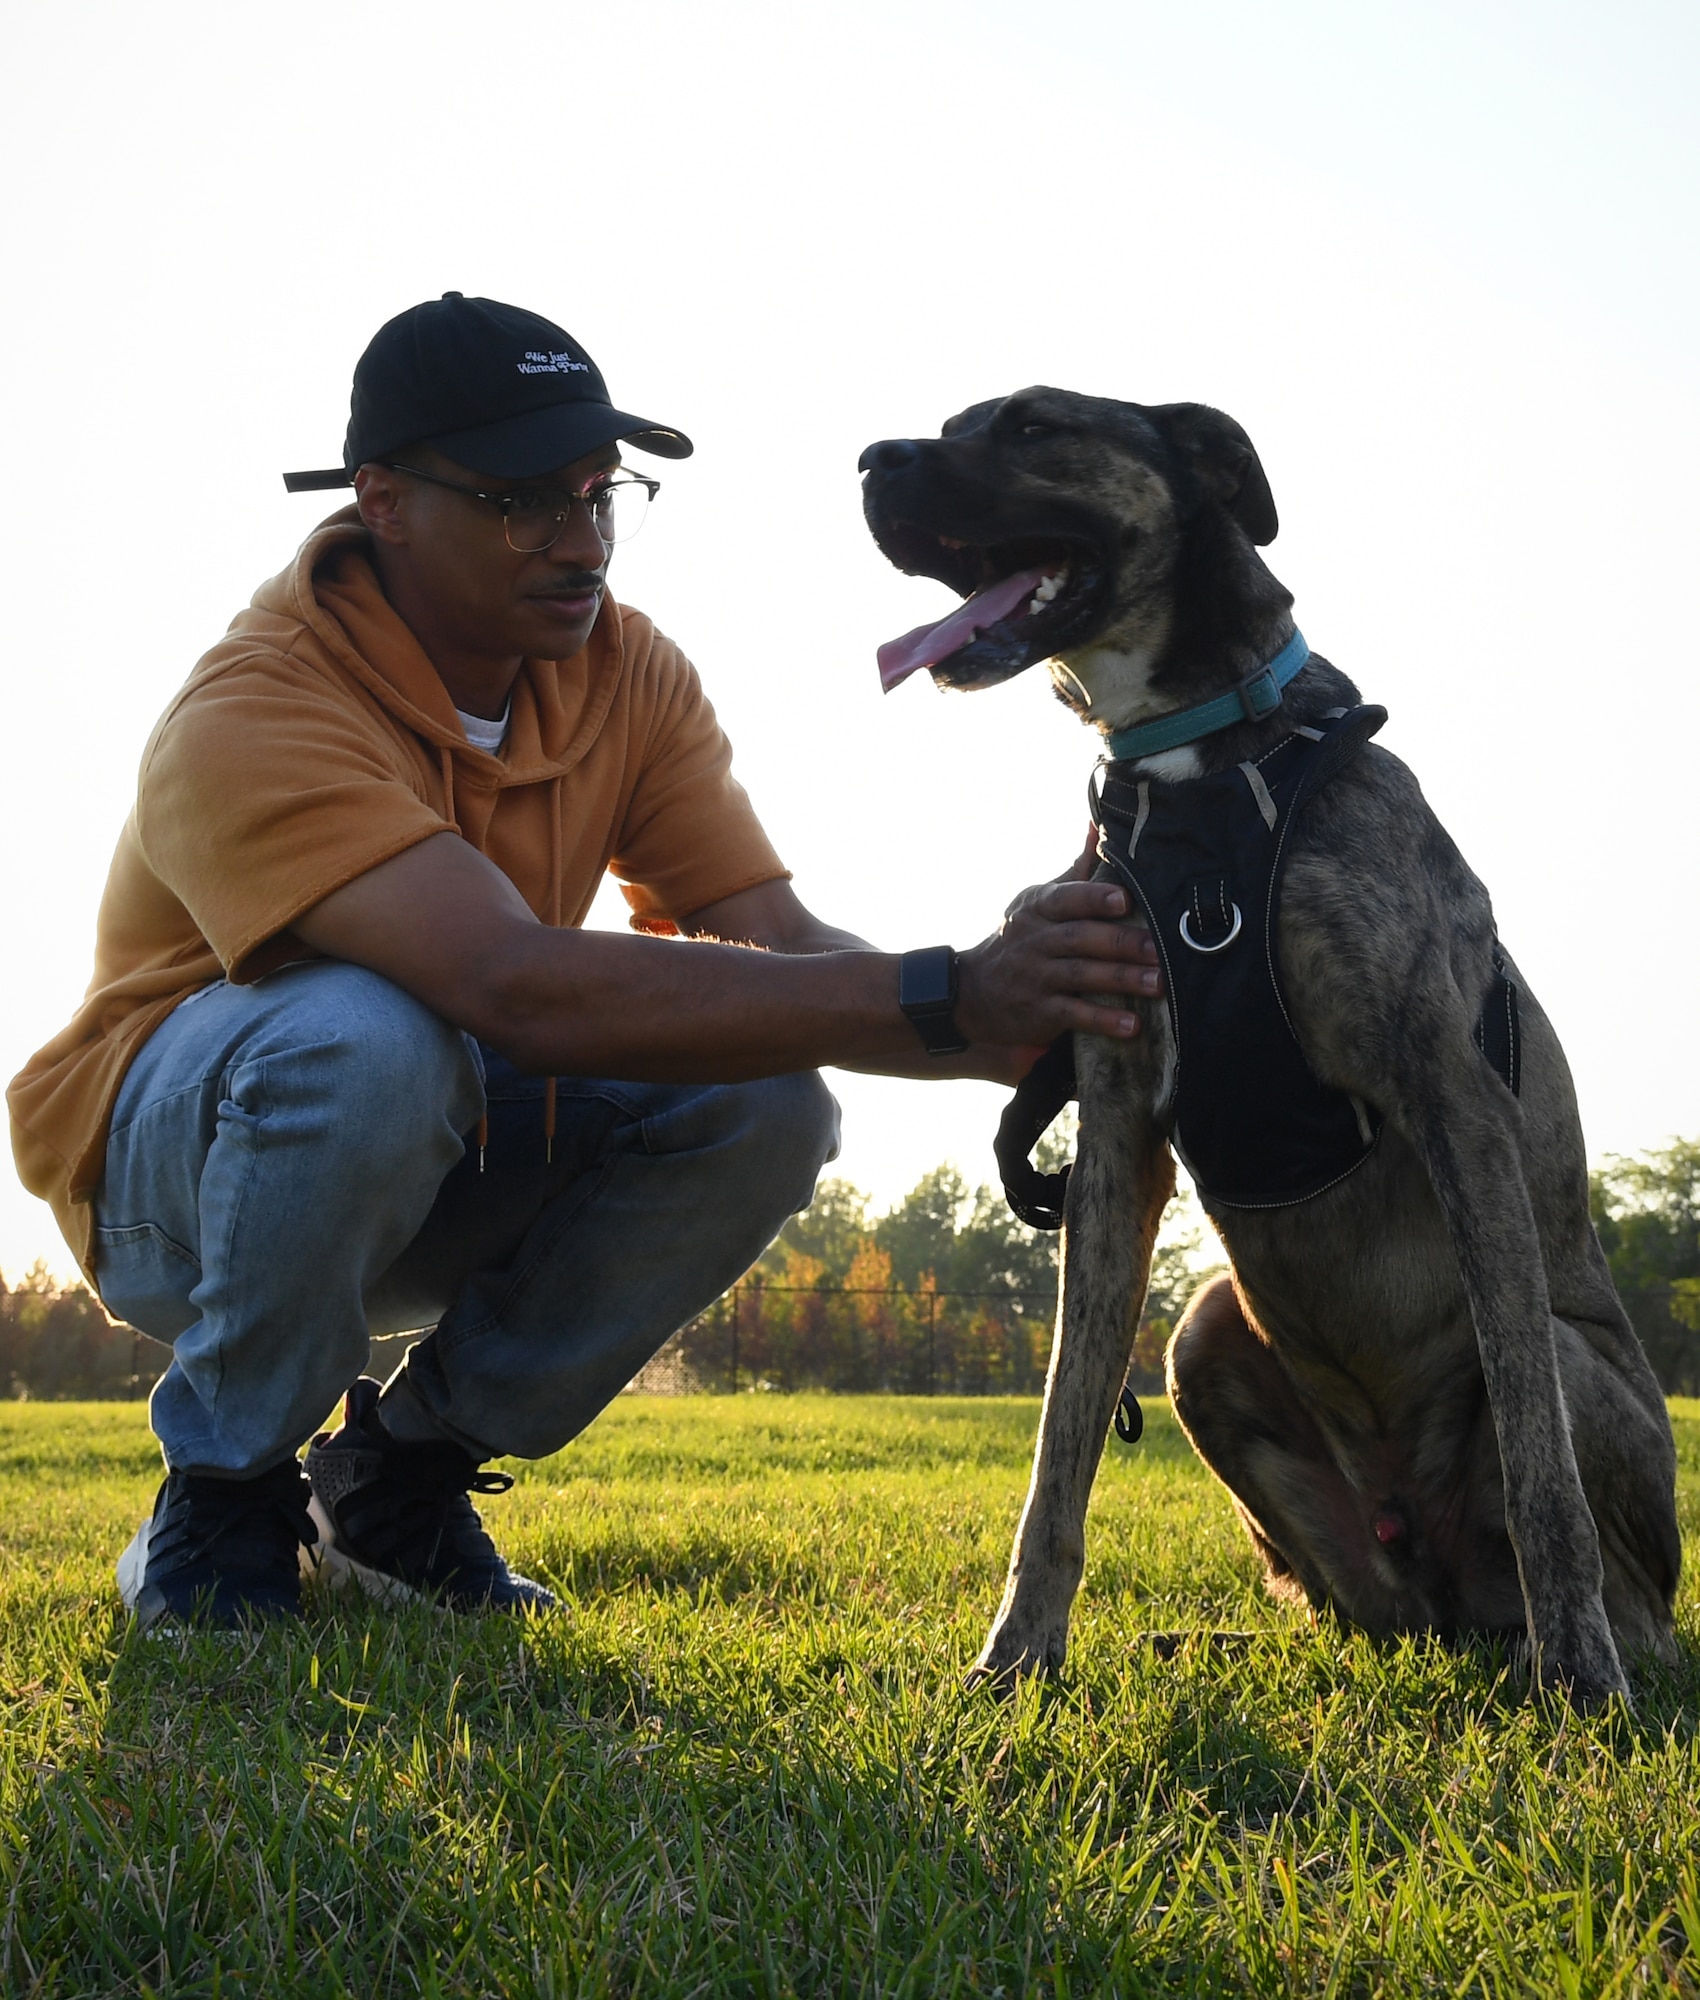 Senior Airman Elijaih Tiggs, 319th Reconnaissance Wing photojournalist journeyman, pets Memphis, his 2-year-old Australian Cattle Dog mix, as Memphis takes a play-break during “Tactical Paws” Sept. 18, 2019, at the dog park on Grand Forks Air Force Base, North Dakota. Tiggs and Memphis attended Tactical Paws, a casual event created to allow the base community to socialize, exercise their dogs and share helpful tips regarding local animal care options. (U.S. Air Force photo by Senior Airman Elora J. Martinez)